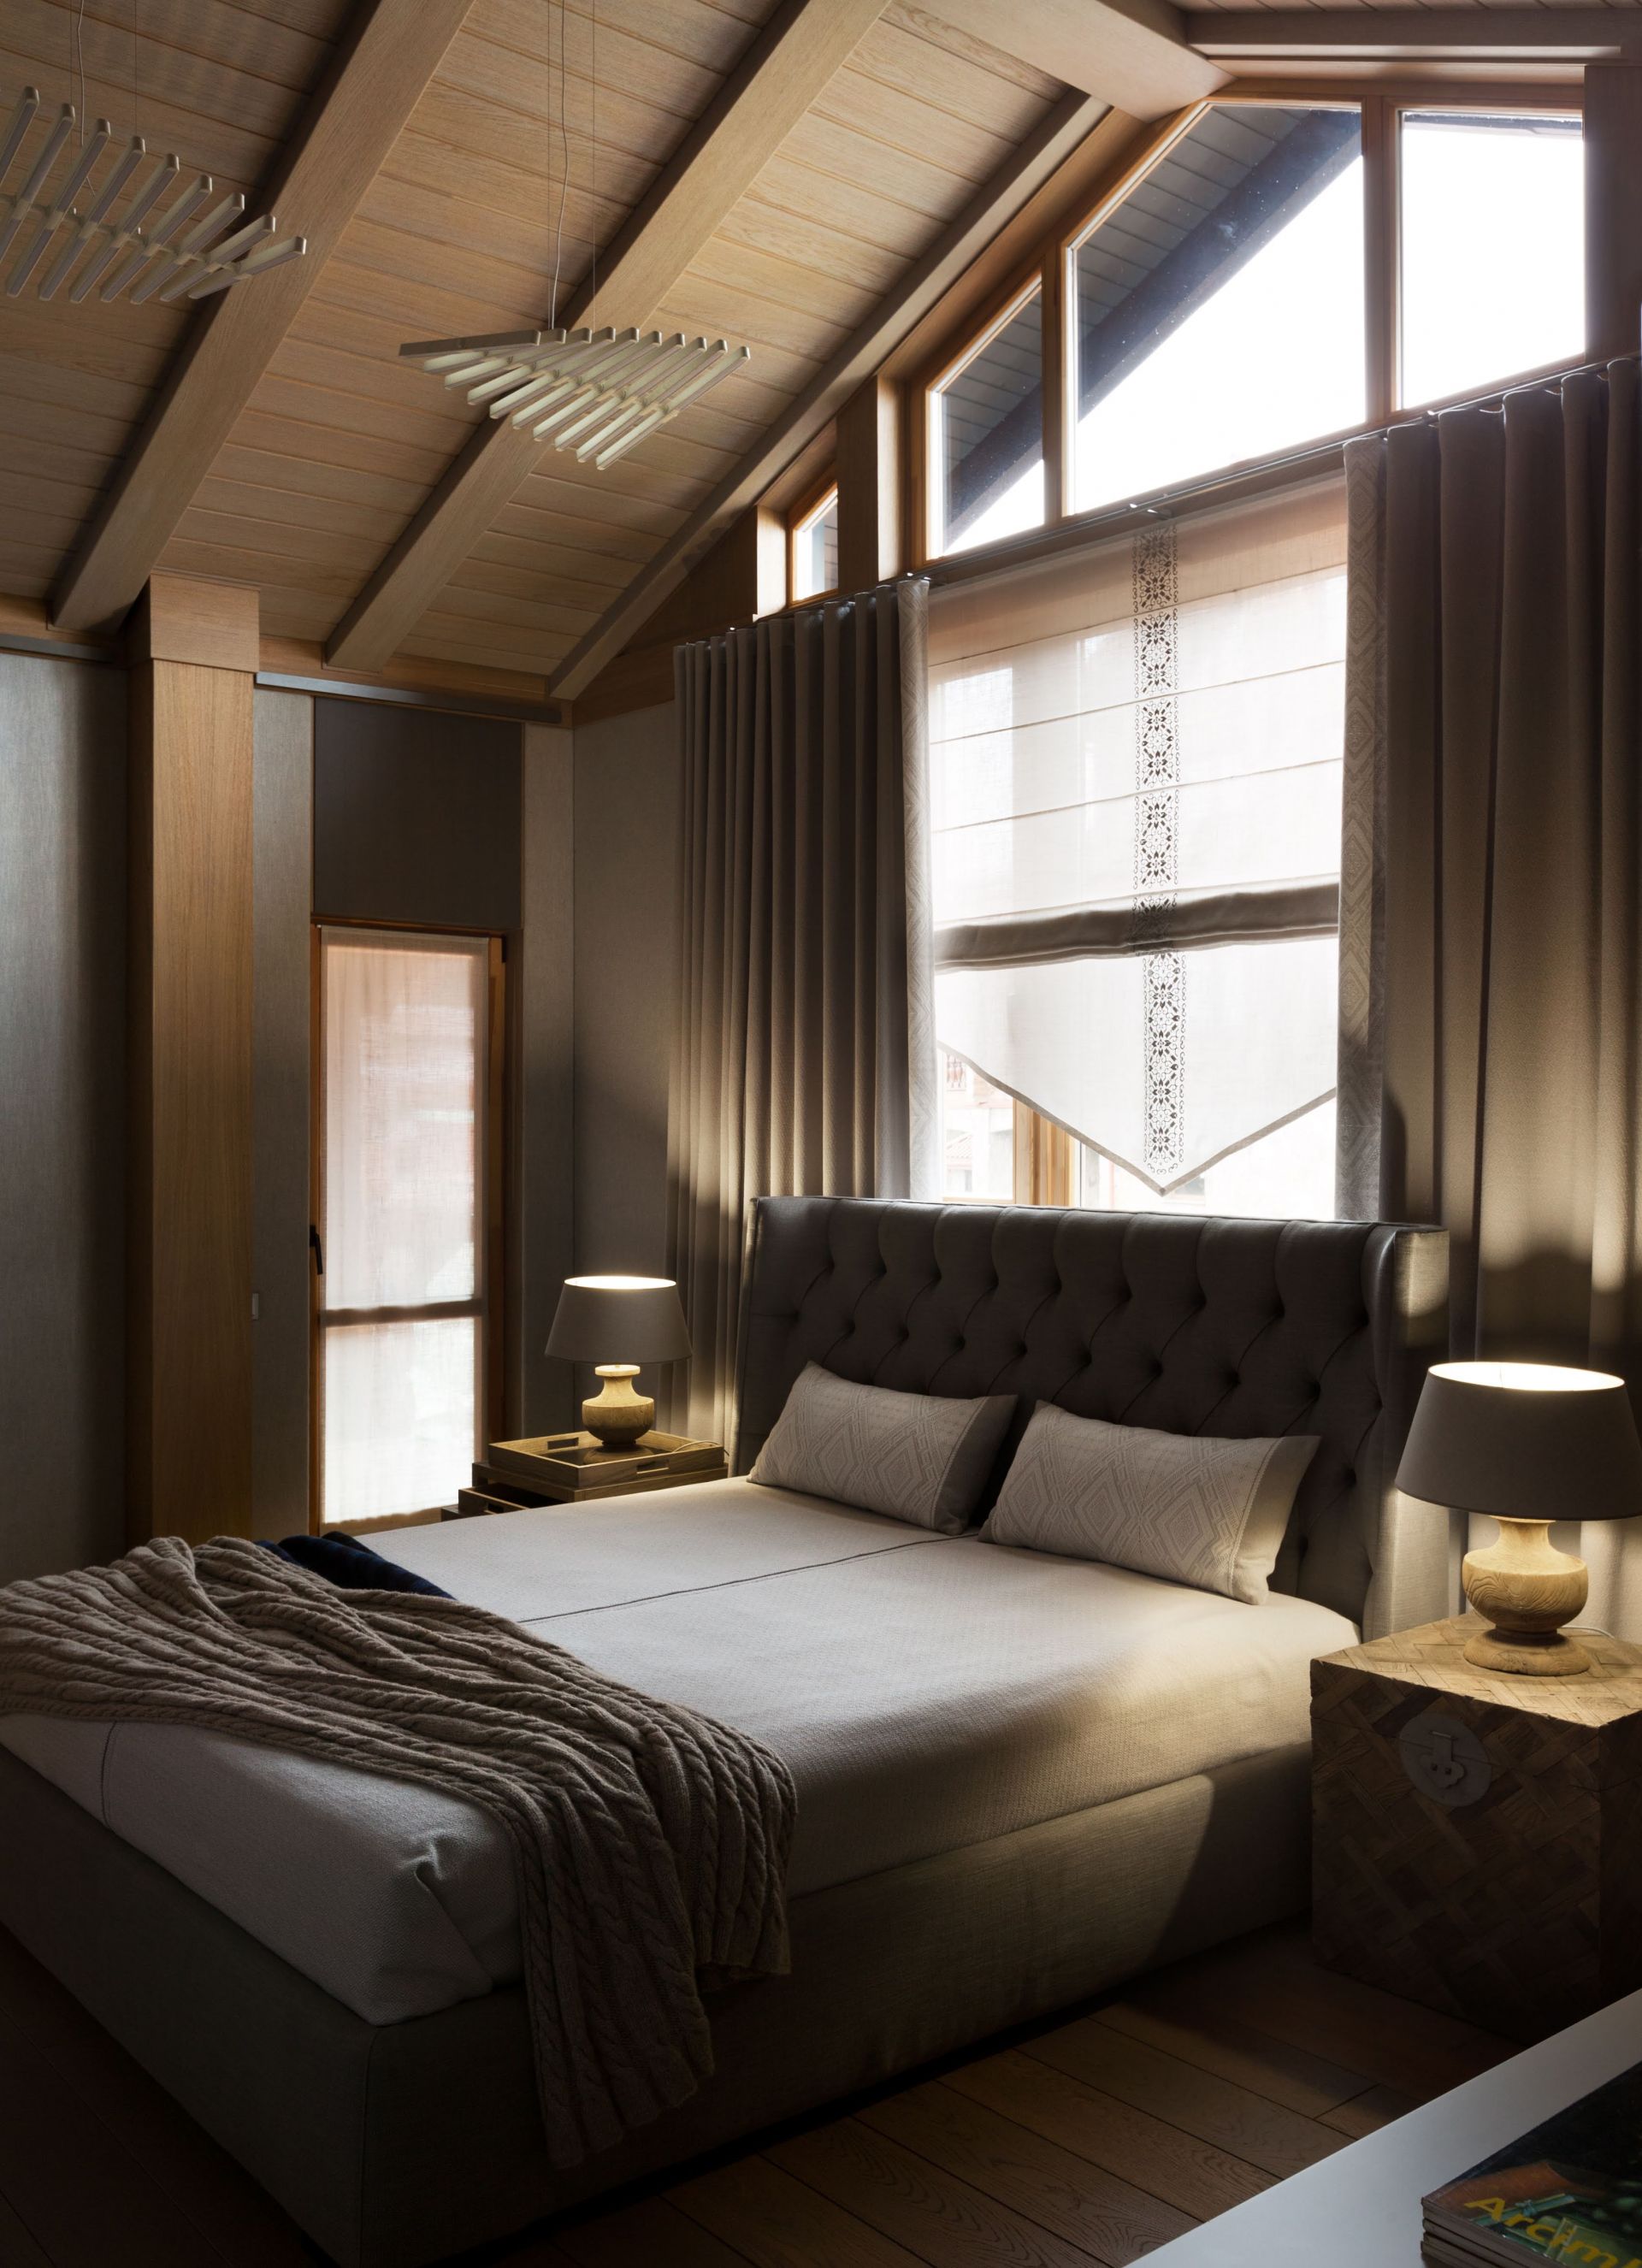 Modern bedroom with timbered interior